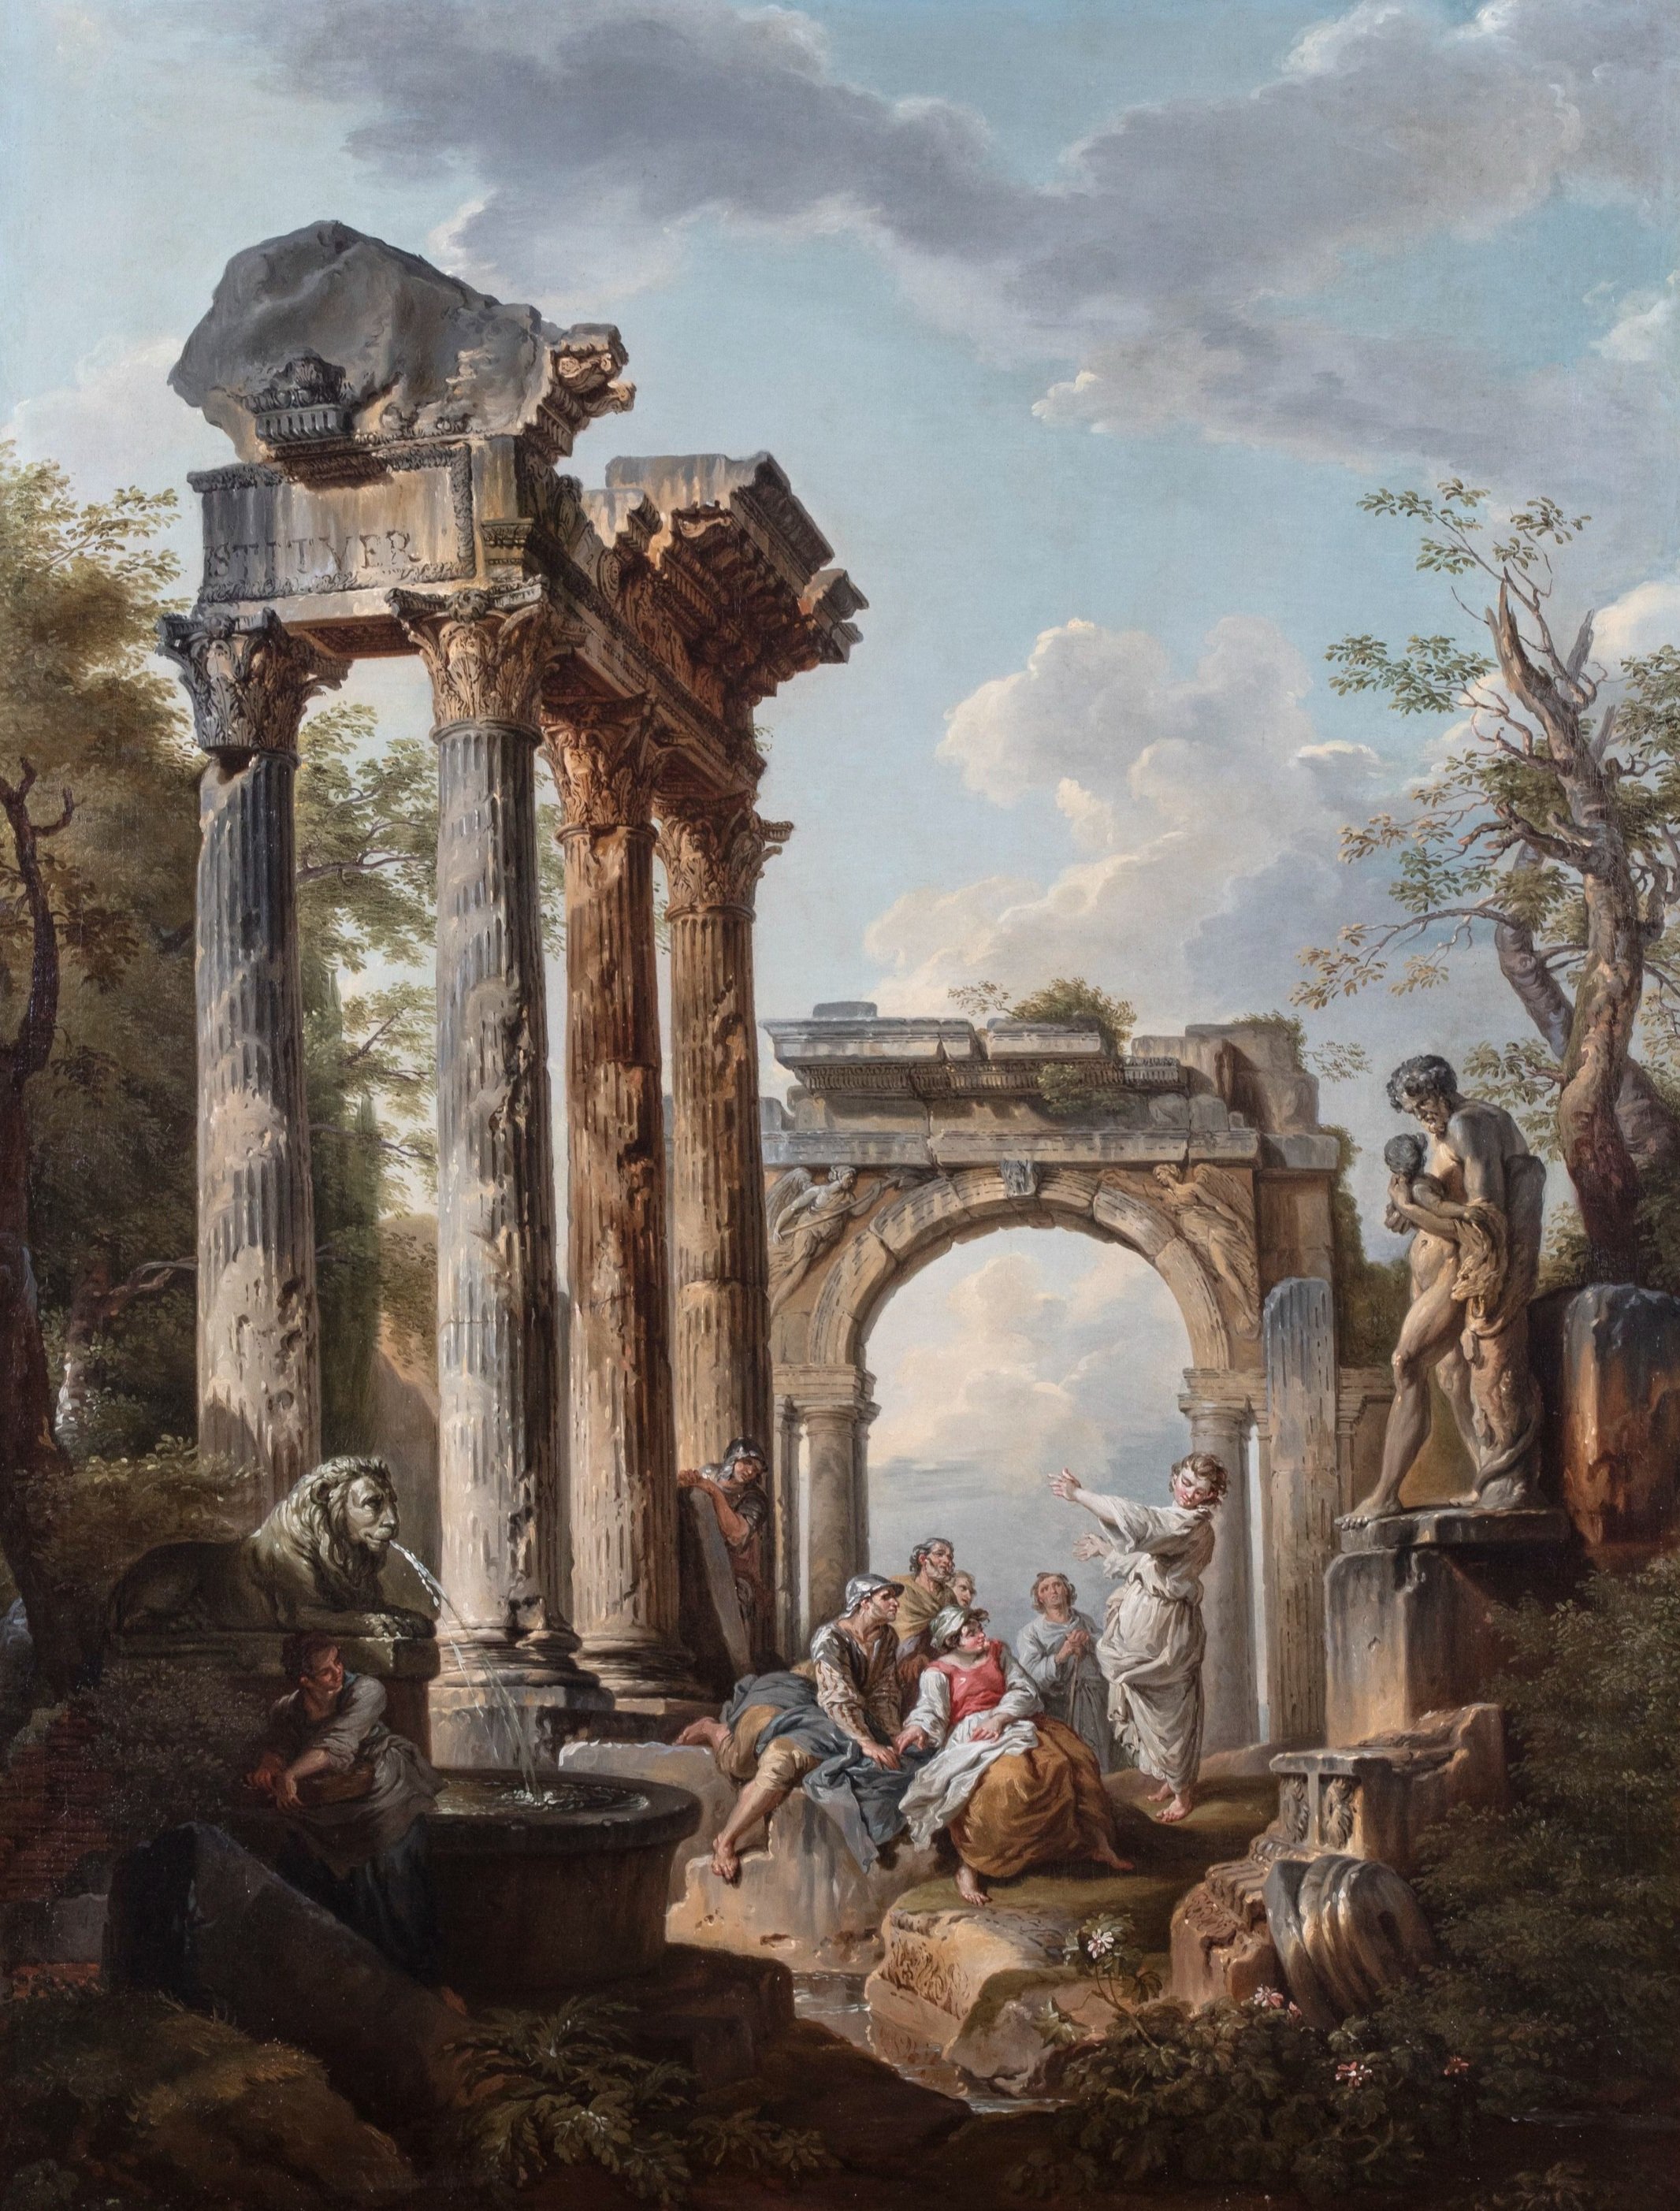 GIOVANNI PAOLO PANINI and WORKSHOP